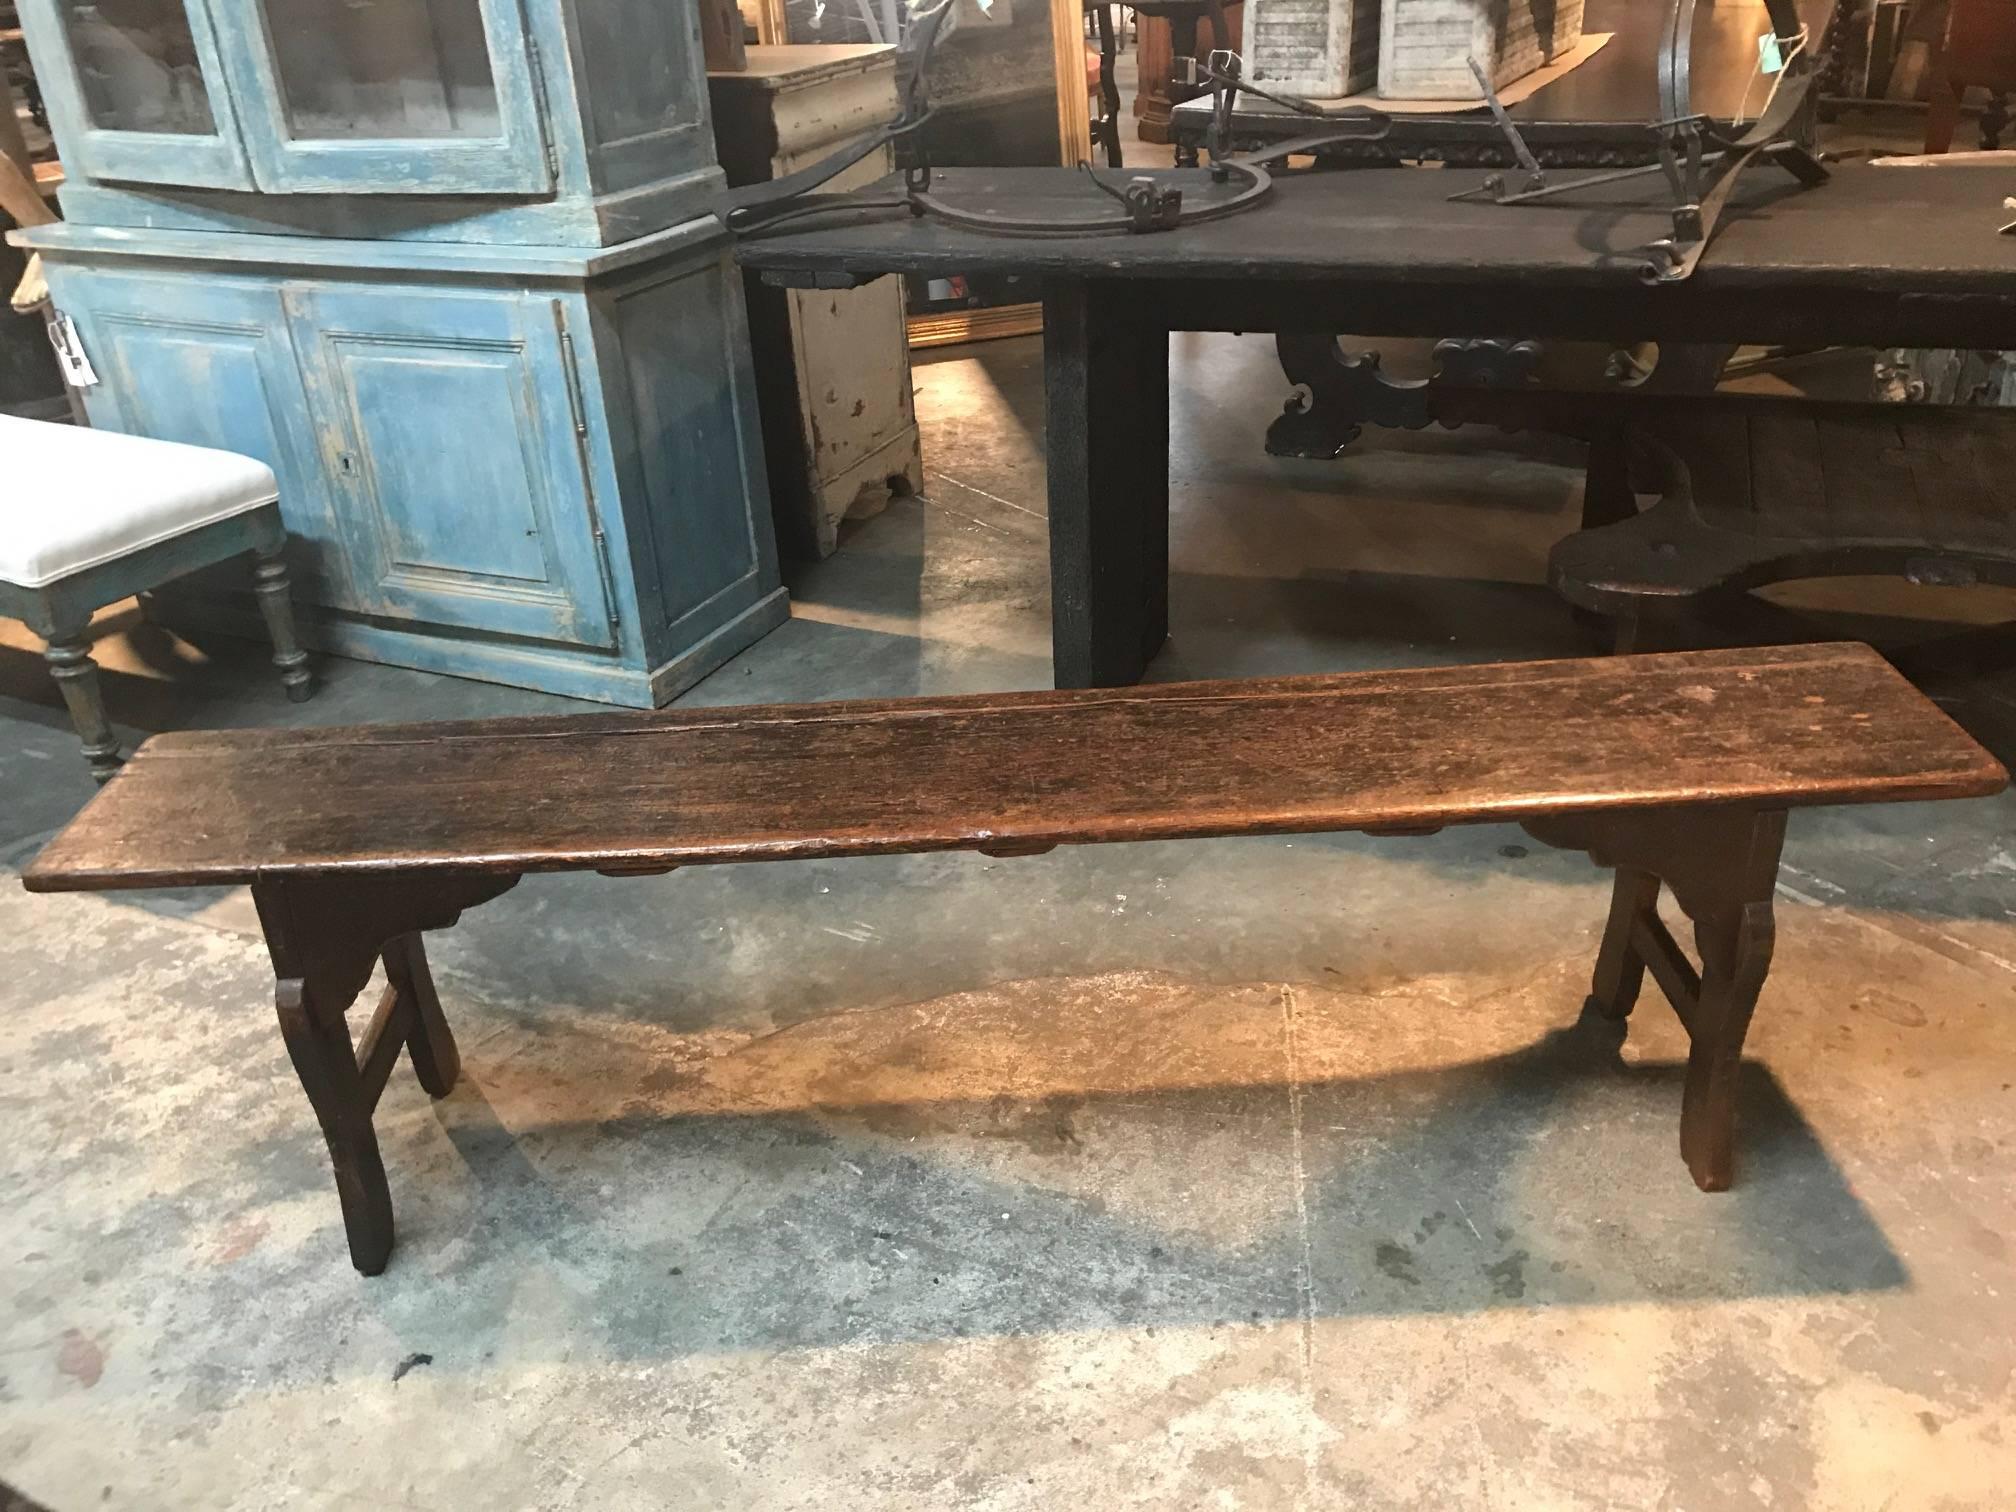 A very handsome primitive 19th century bench from the Catalan region of Spain. Beautifully constructed from richly stained pine.